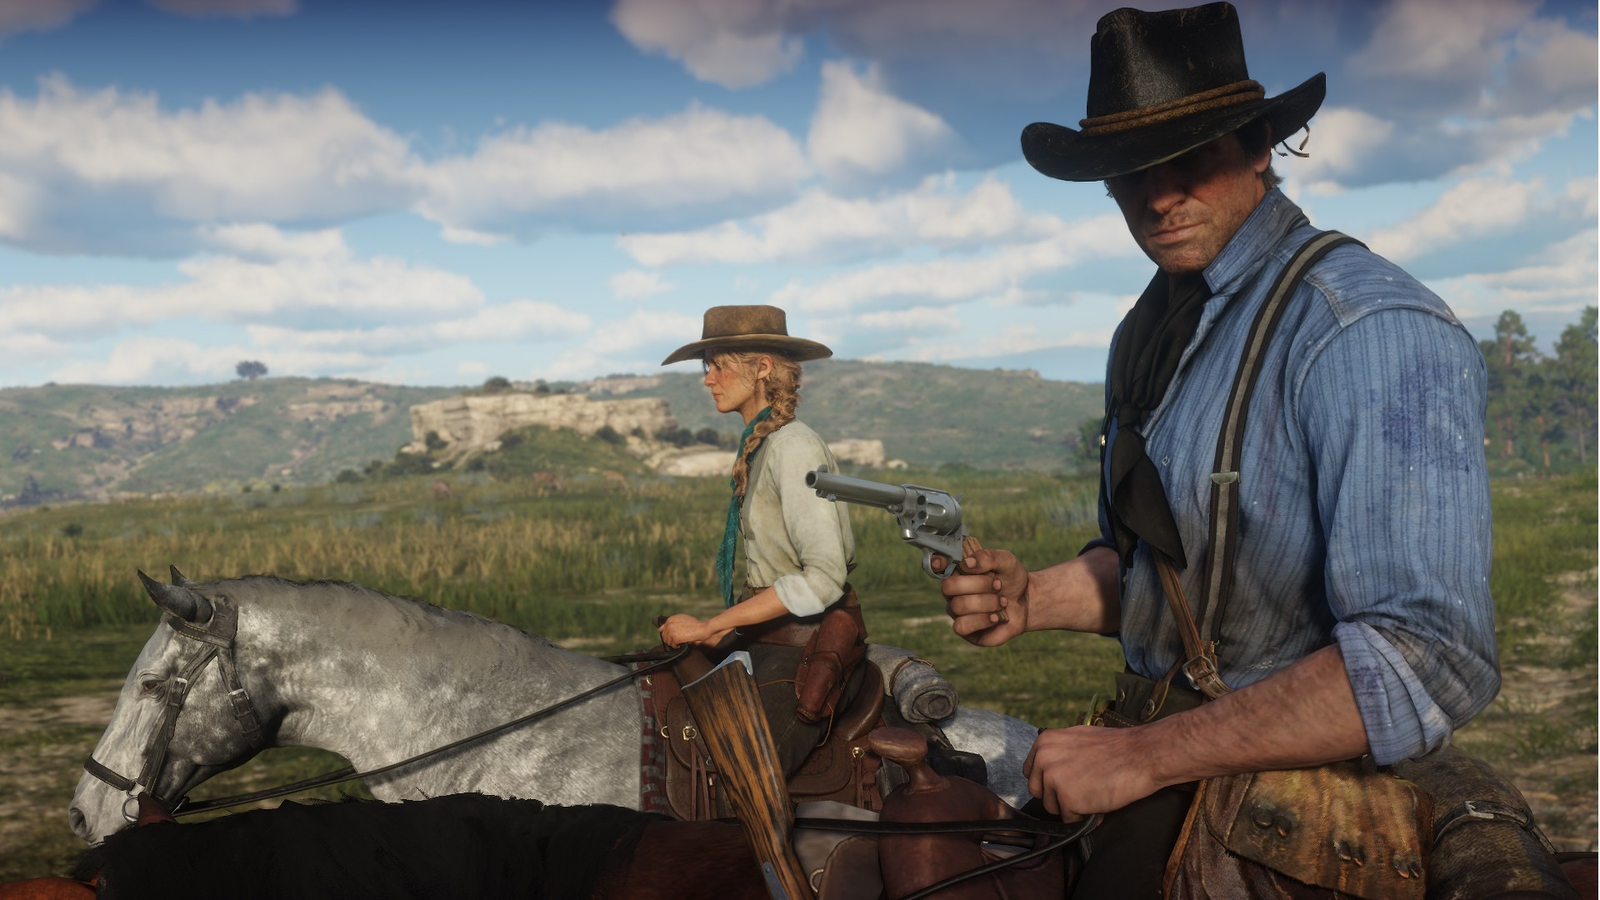 Red Dead Redemption 2 Ultra, Games, Red Dead Redemption, Western, ps4,  game, HD wallpaper